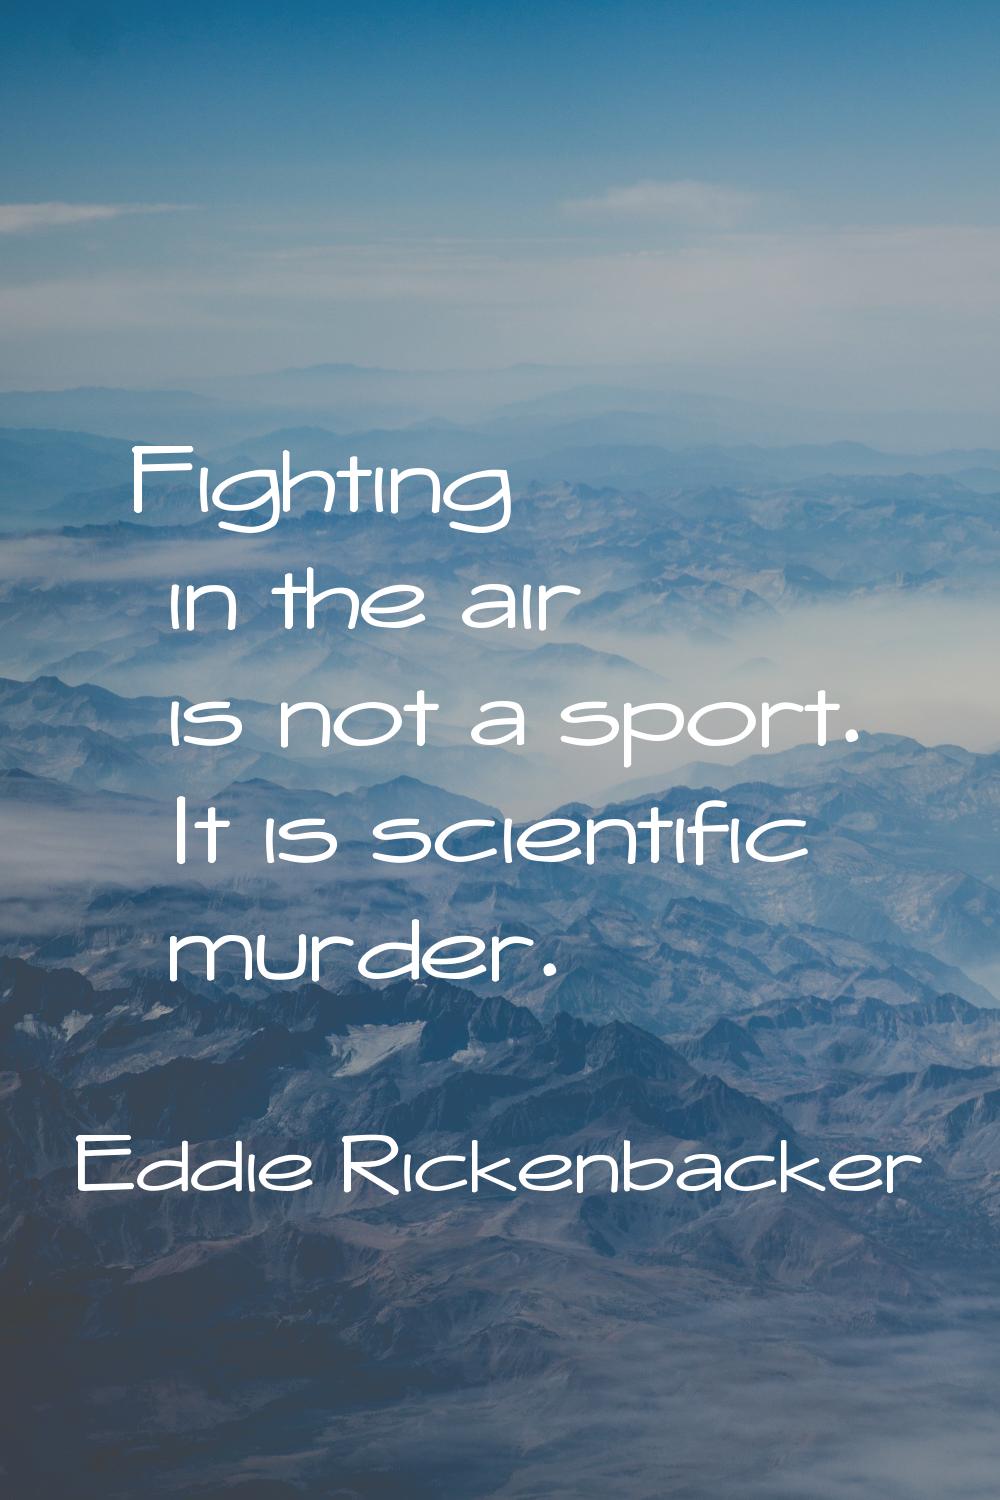 Fighting in the air is not a sport. It is scientific murder.